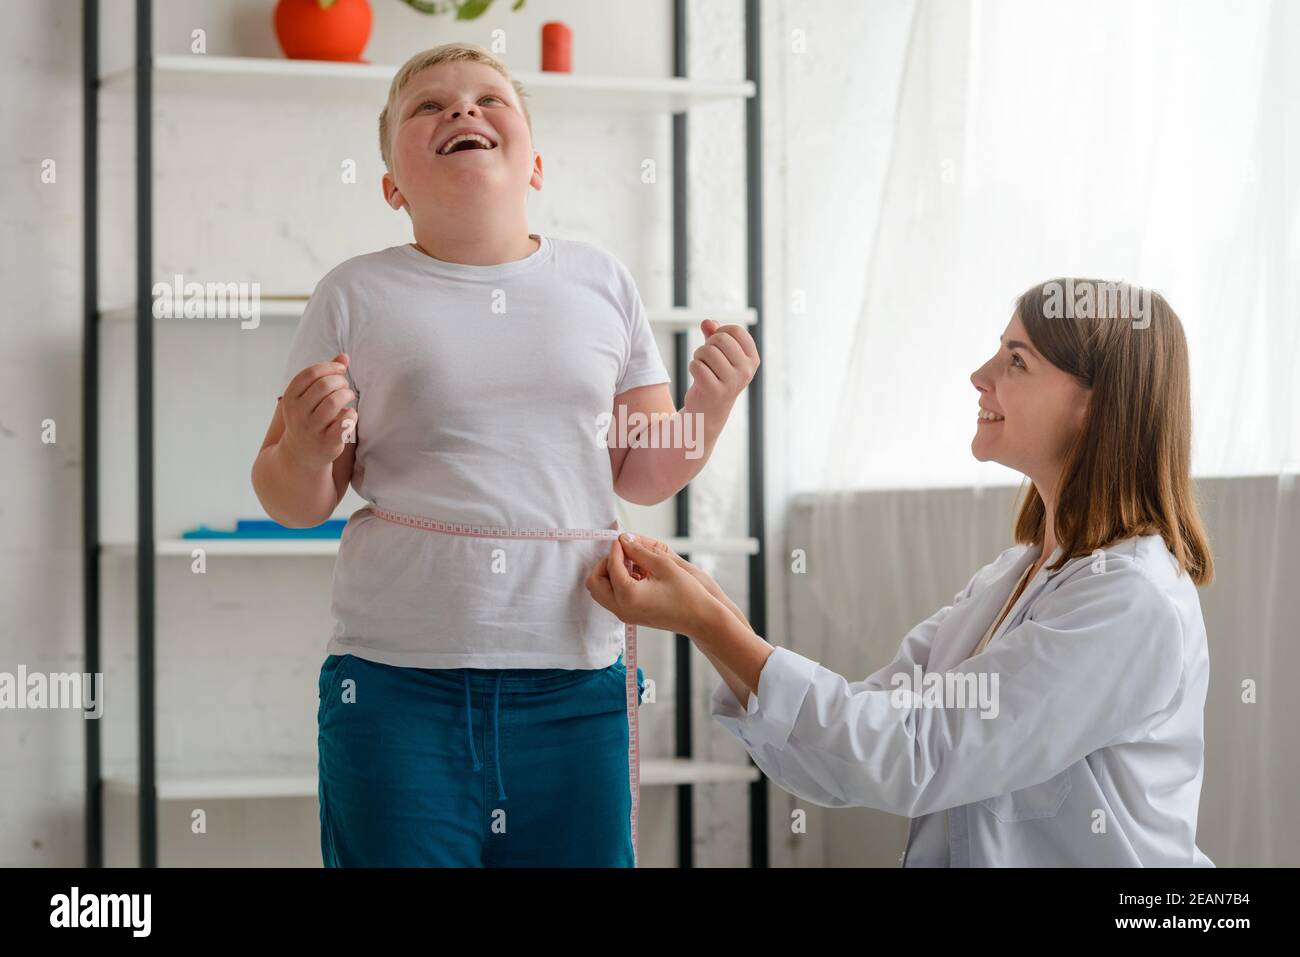 Boy's happy about results of weight loss Stock Photo